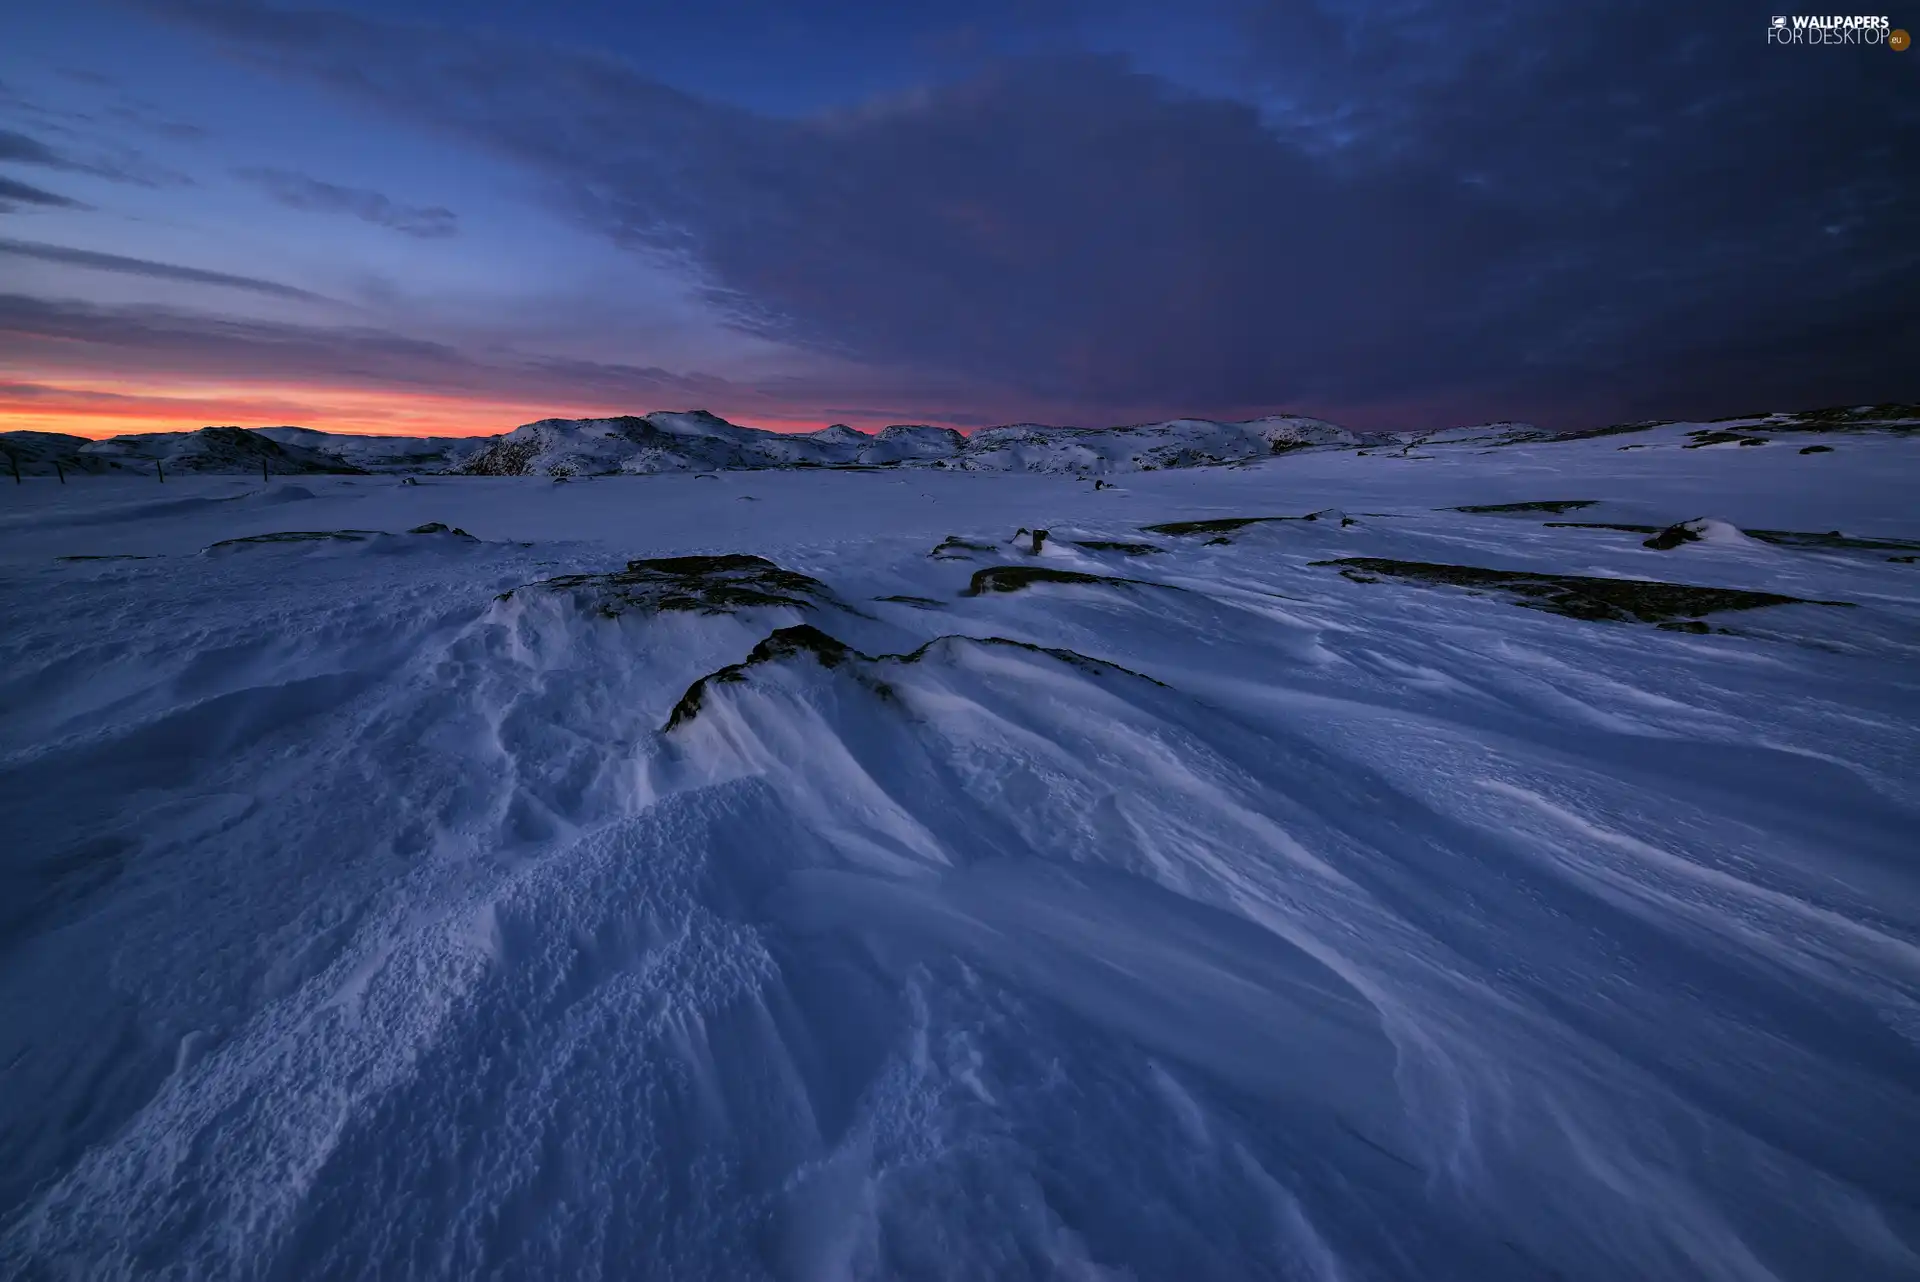 drifts, winter, Mountains, snow, Great Sunsets